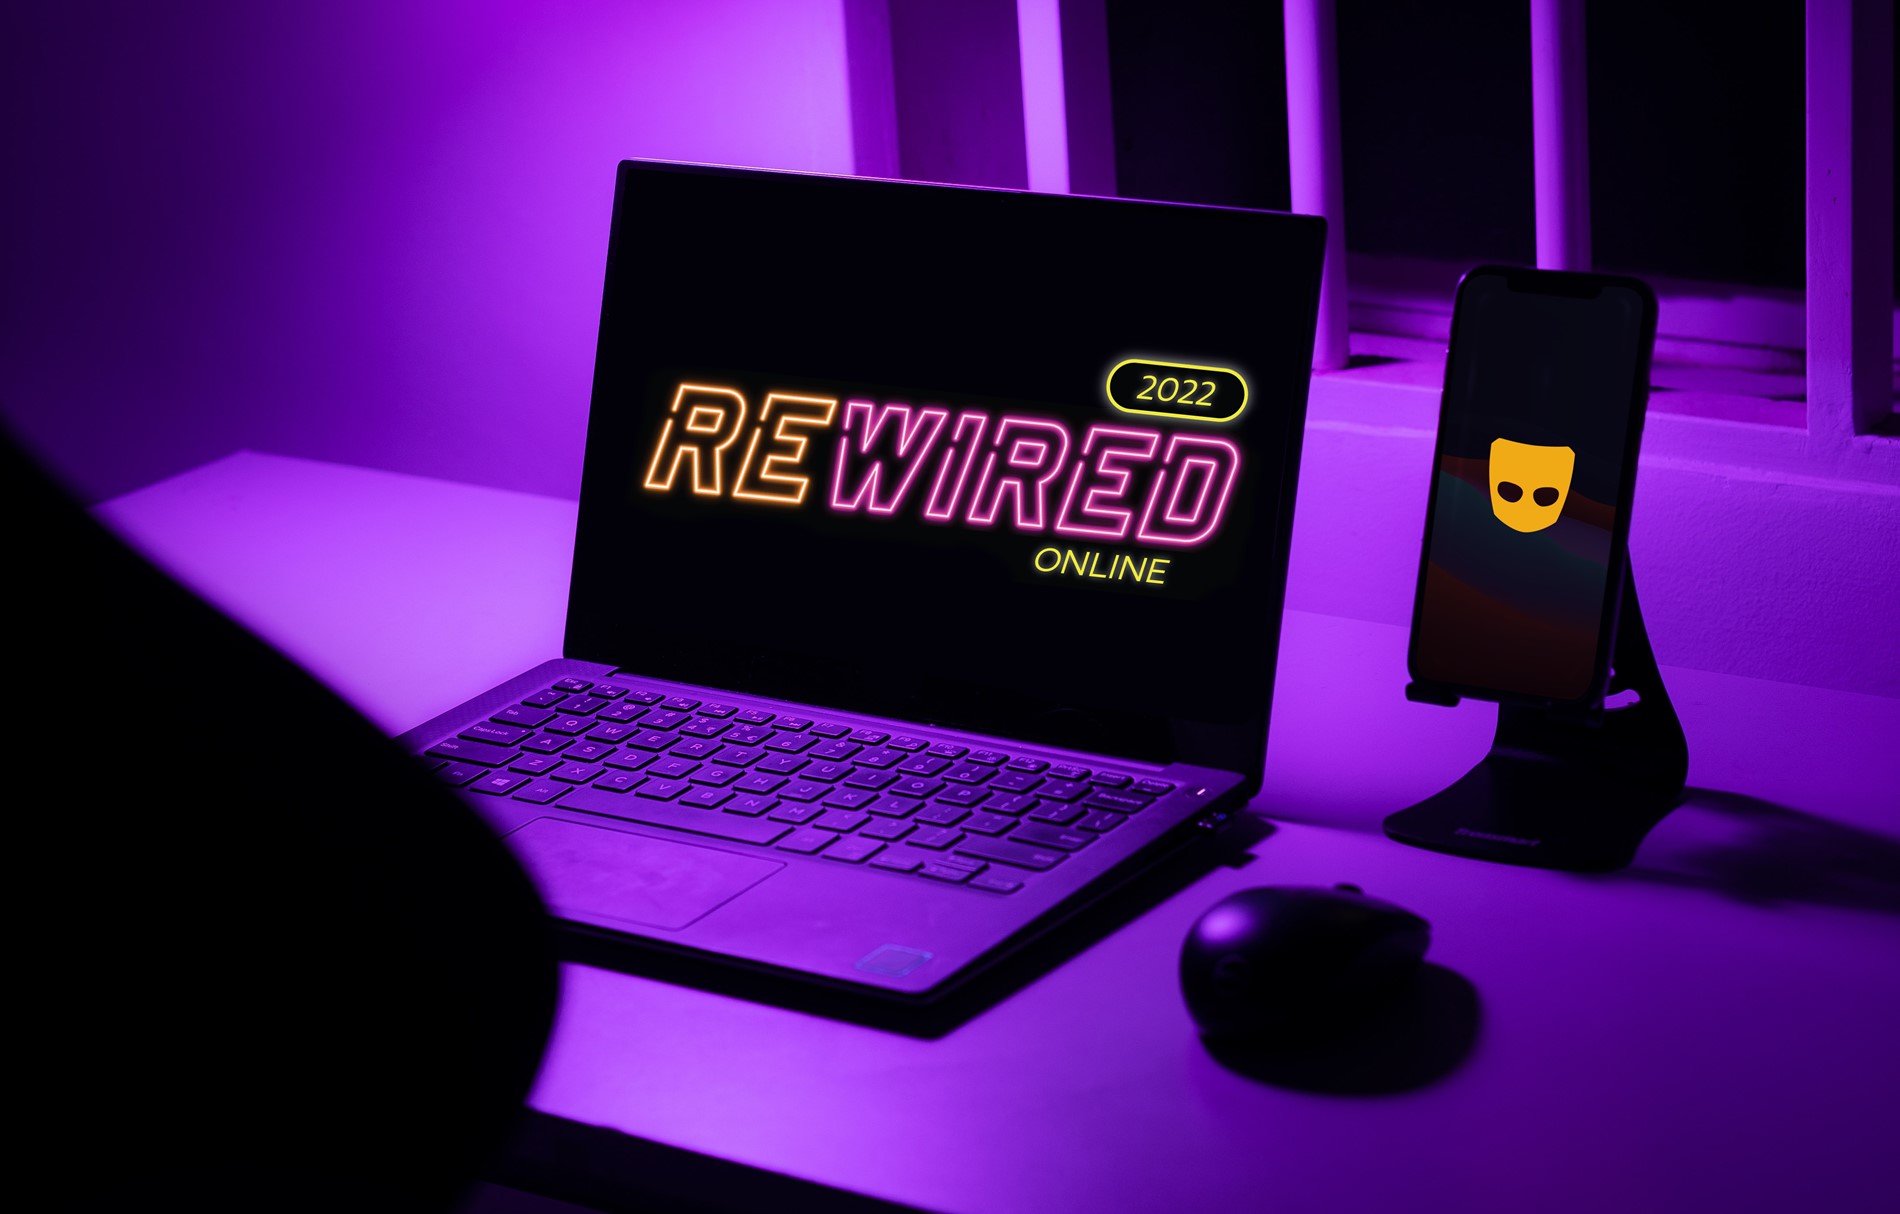 Rewired Online Article Image